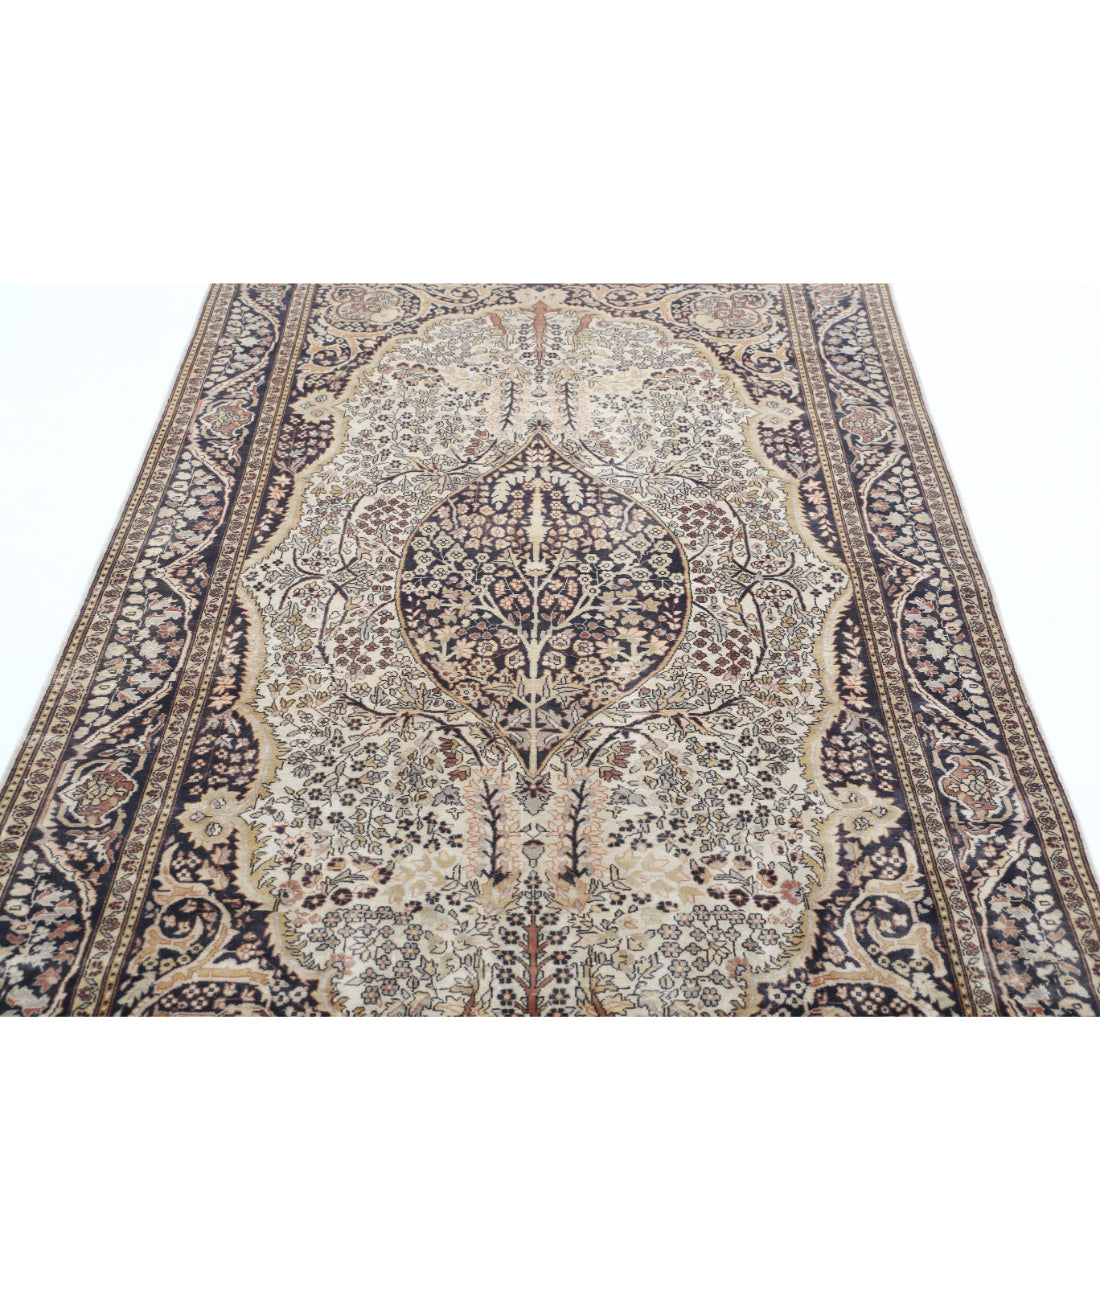 Hand Knotted Antique Persian Tabriz Wool Rug - 4'6'' x 8'0'' 4'6'' x 8'0'' (135 X 240) / Ivory / Brown